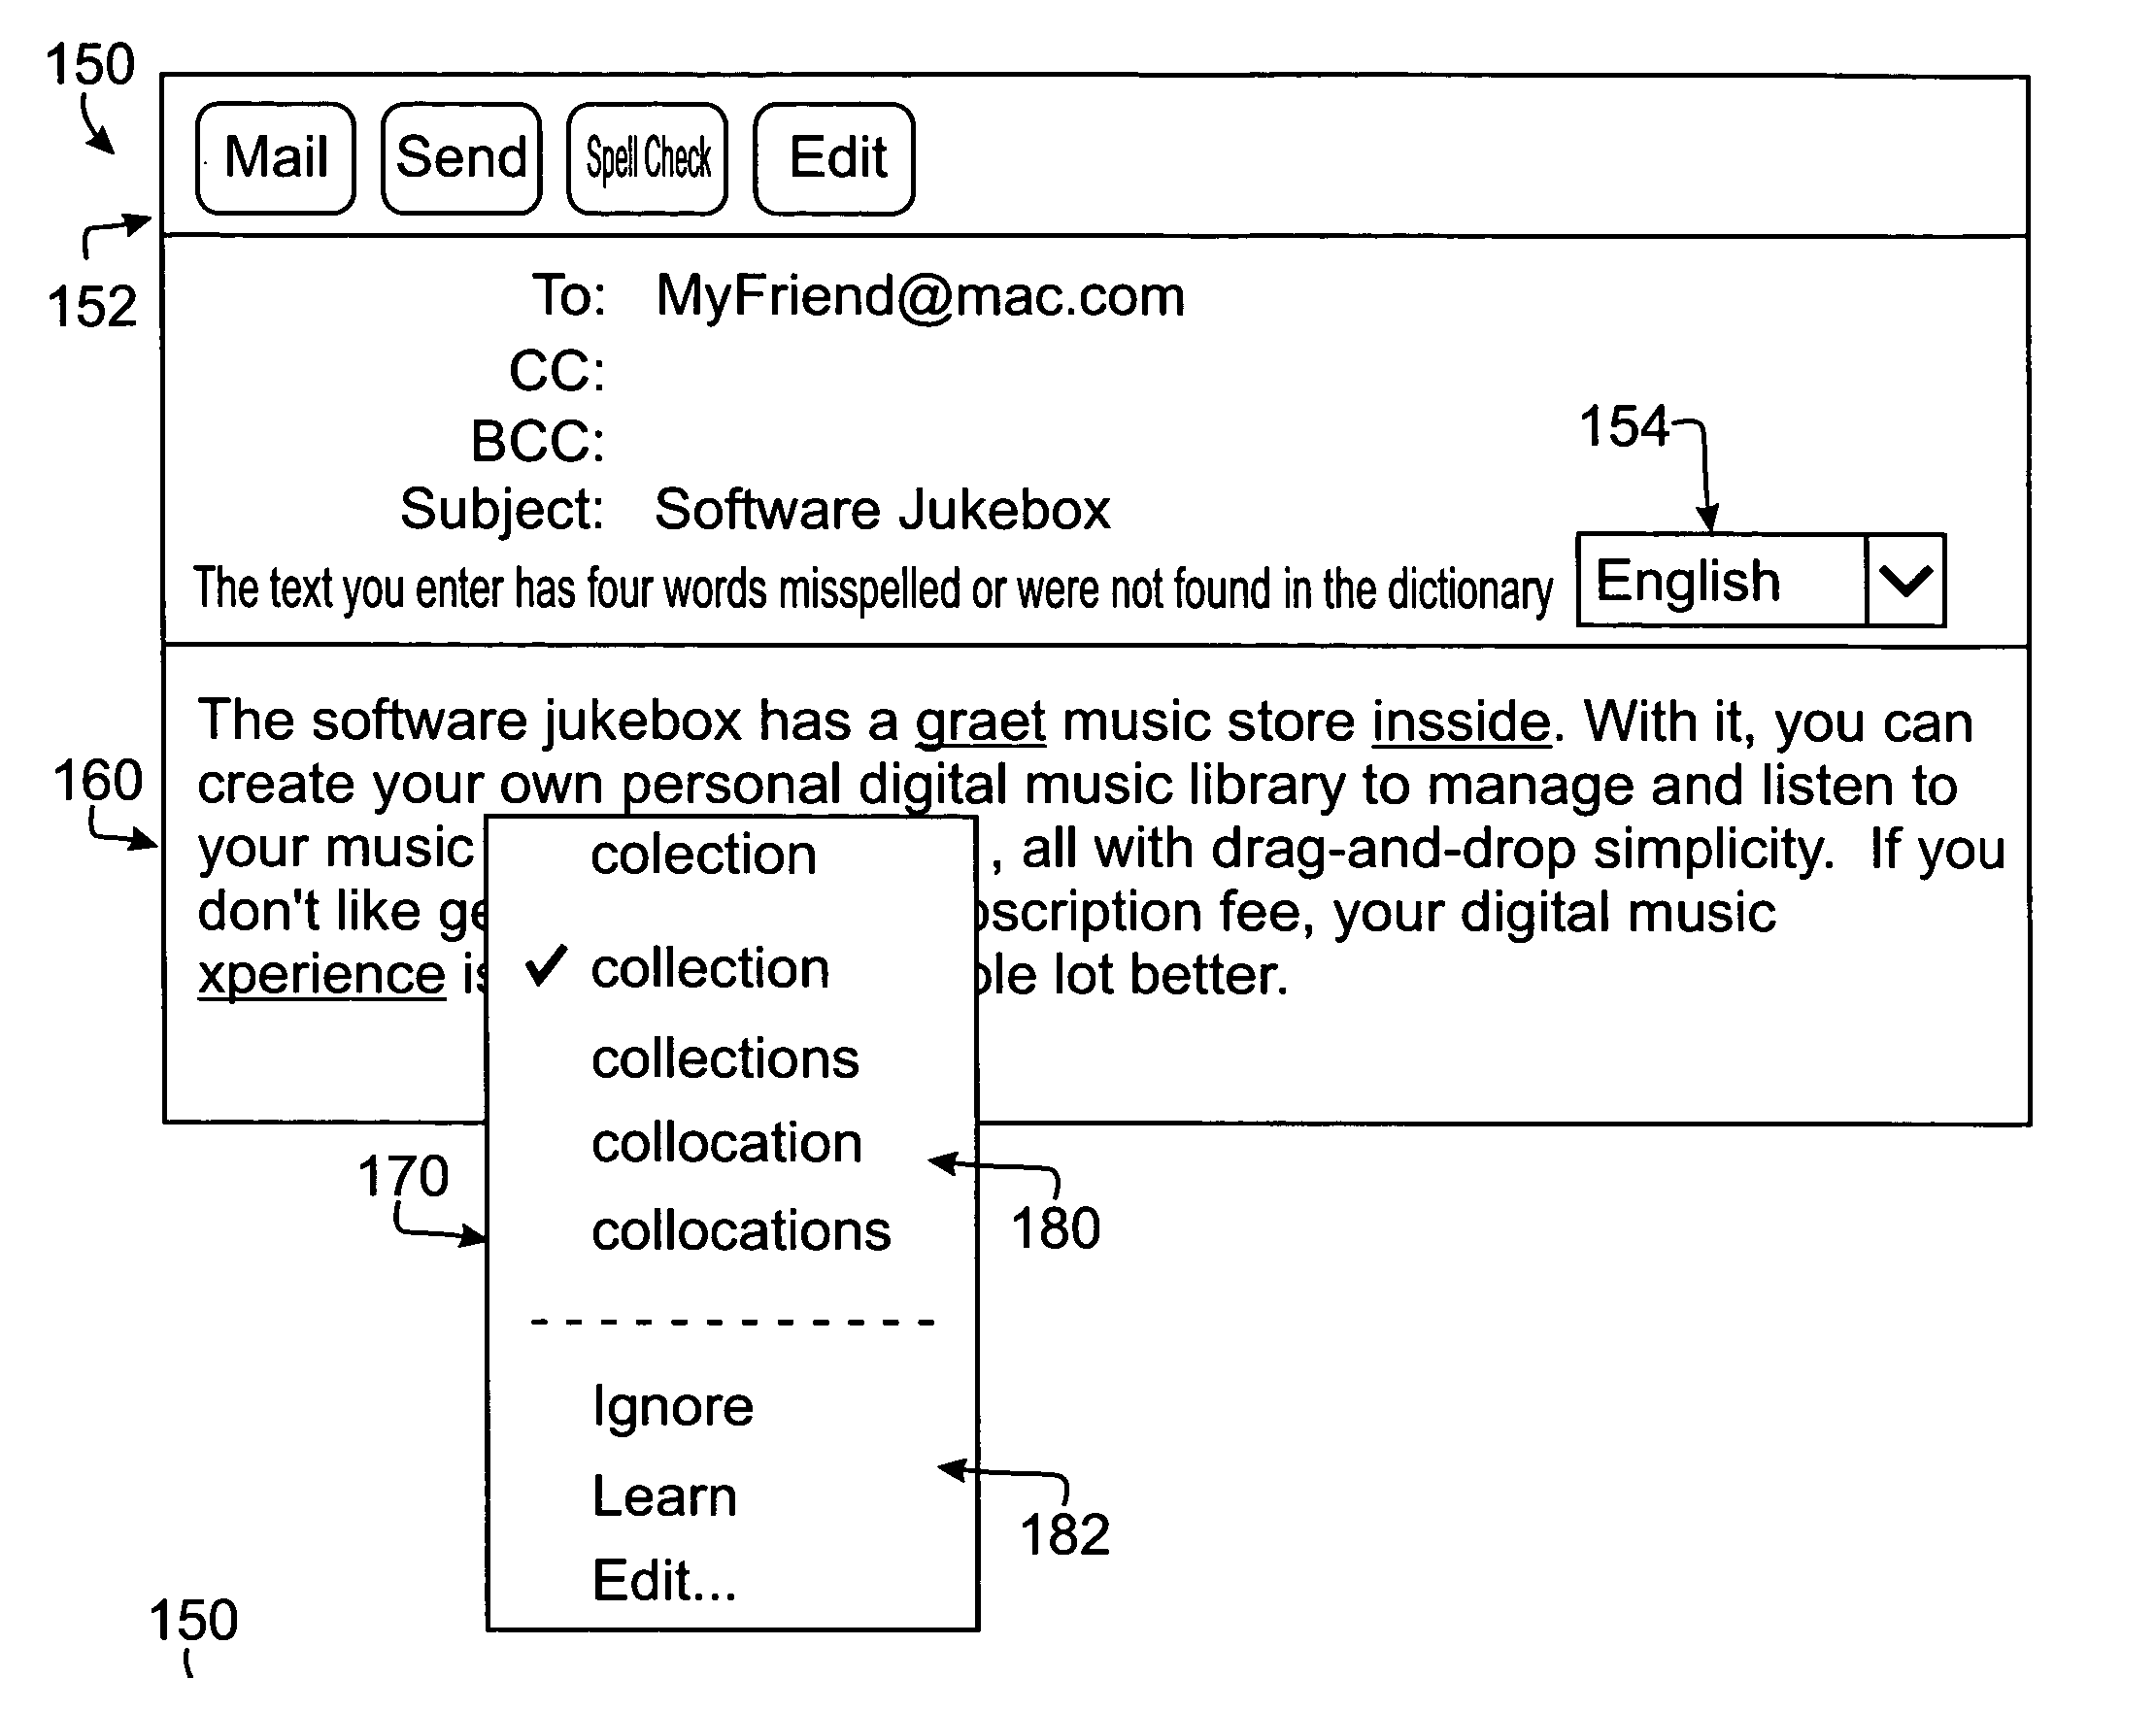 Routine and interface for correcting electronic text